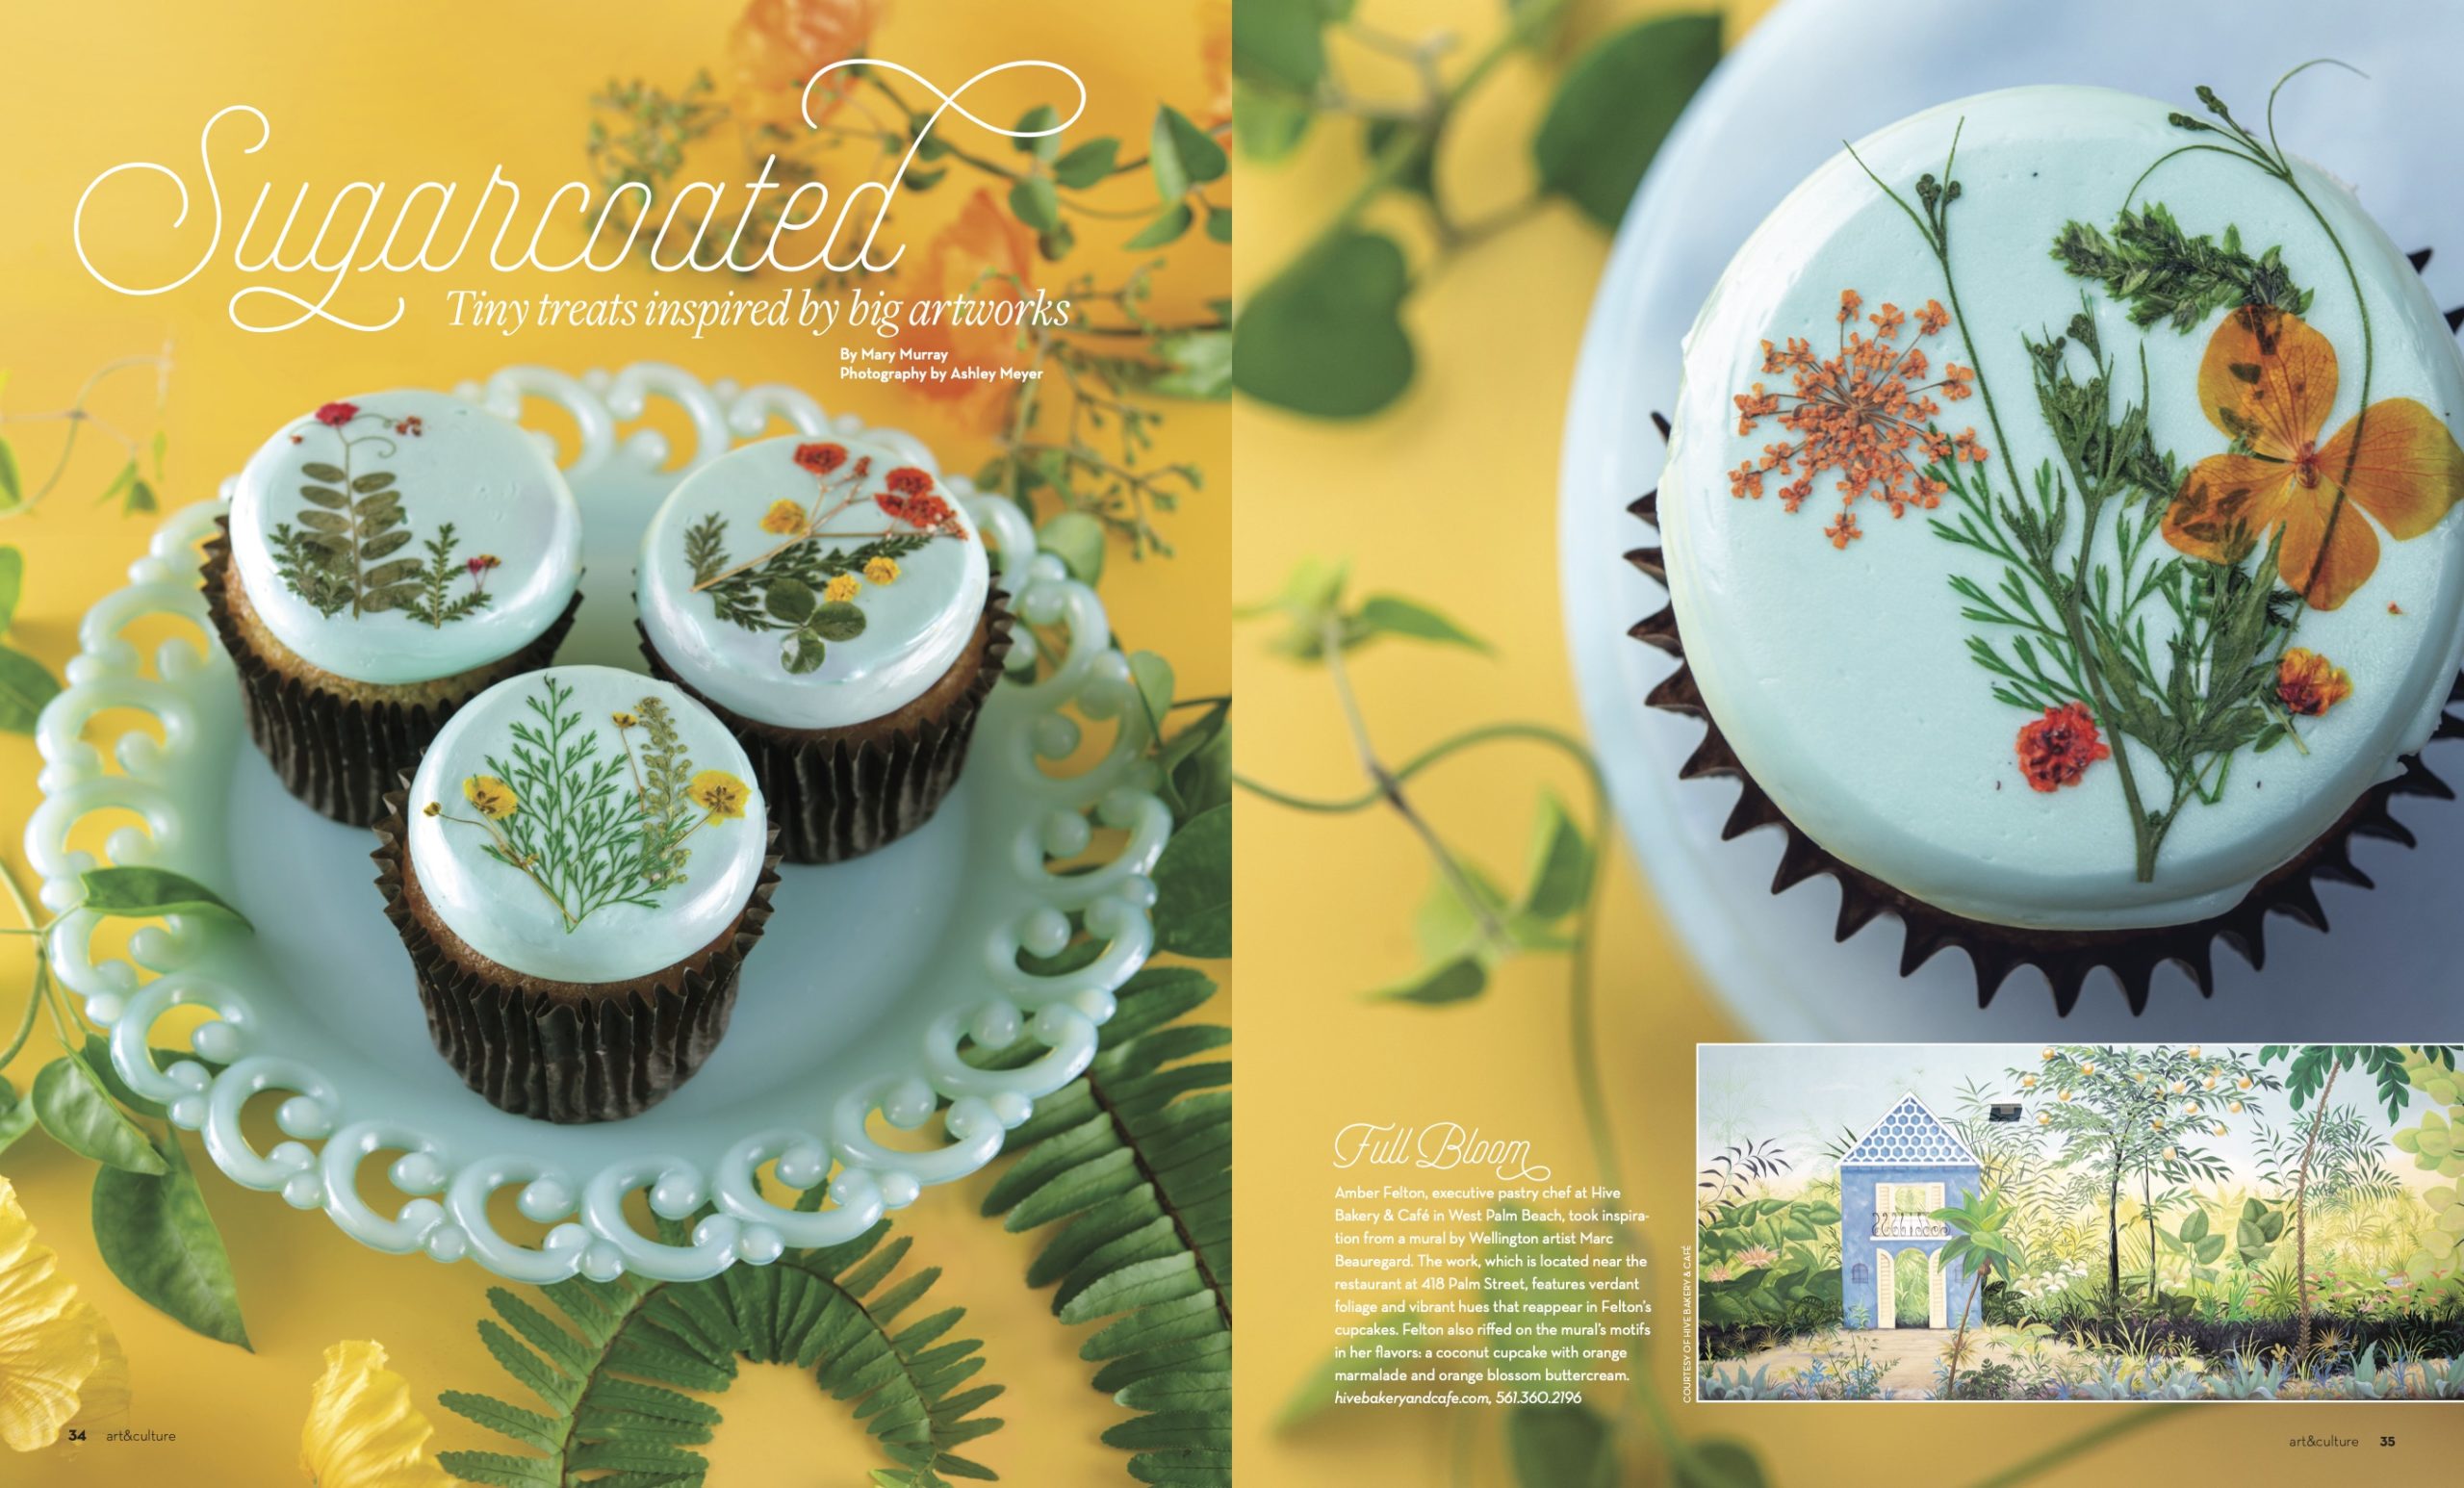 Print features with cupcakes with pressed flowers